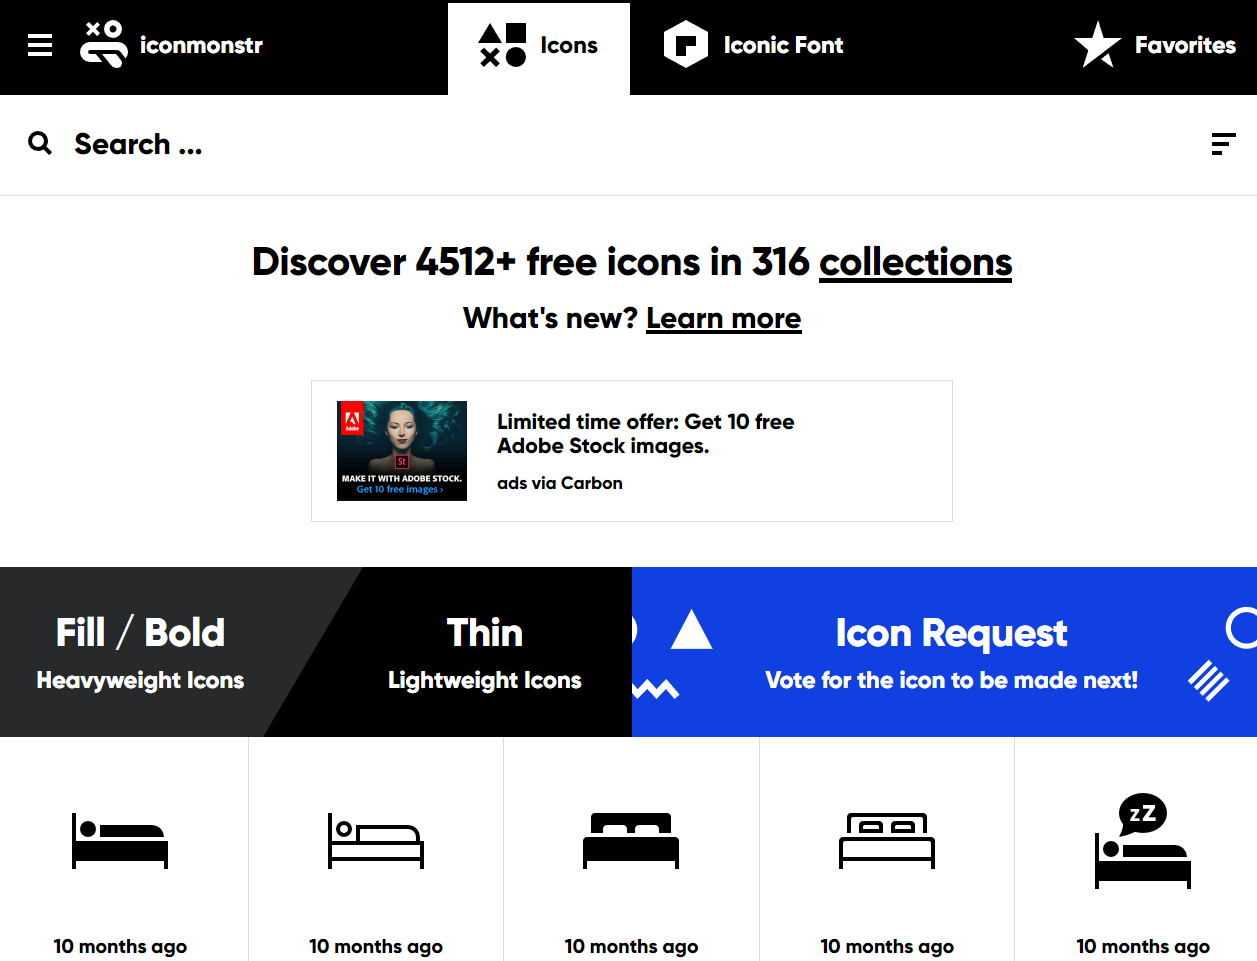 iconmonstr is a powerful icon search engine